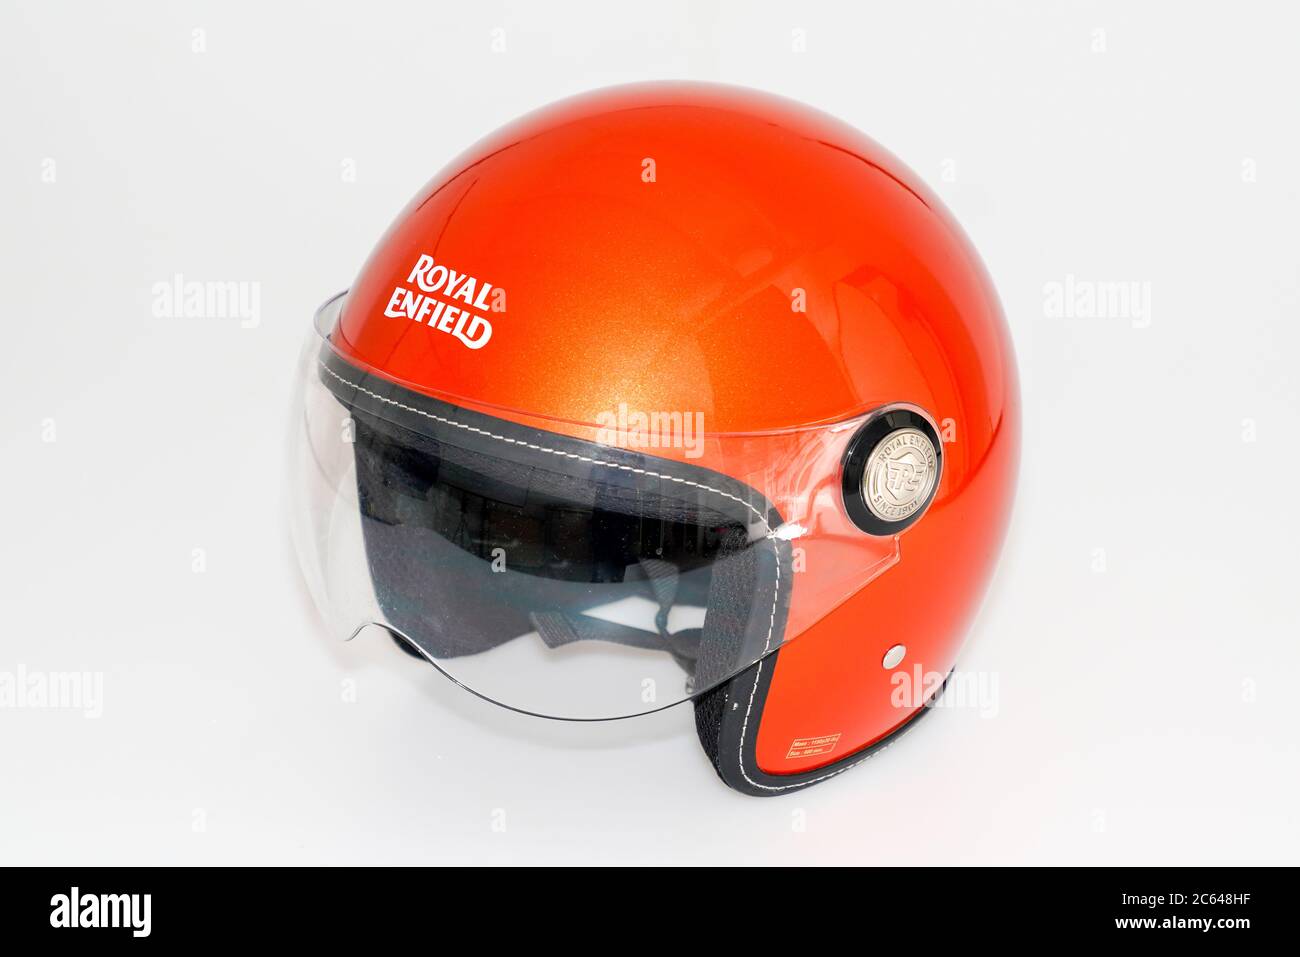 Bordeaux , Aquitaine / France - 07 05 2020 : Royal Enfield logo sign on orange helmet safety worn to protect motorbike man head from injuries Stock Photo